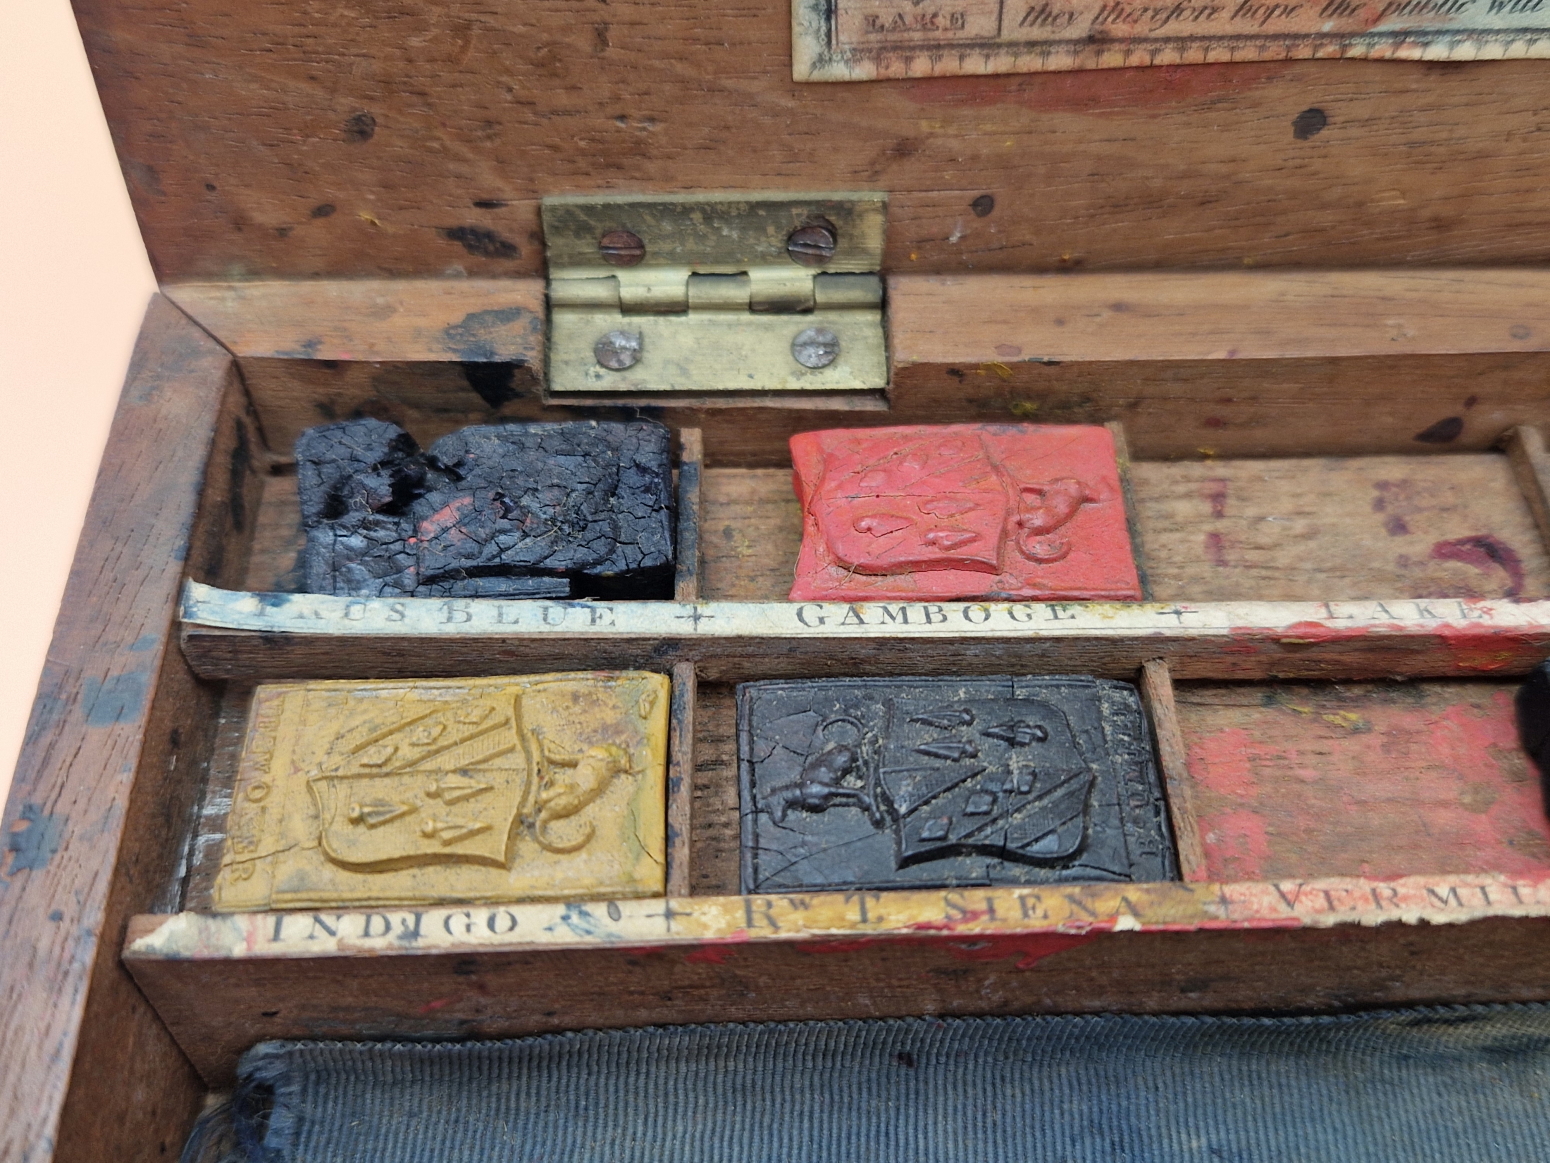 A LATE 19th C. REEVES MAHOGANY PAINT BOX CONTAINING SOME BLOCKS OF UNUSED PAINT AND CERAMIC PALETTES - Image 6 of 9